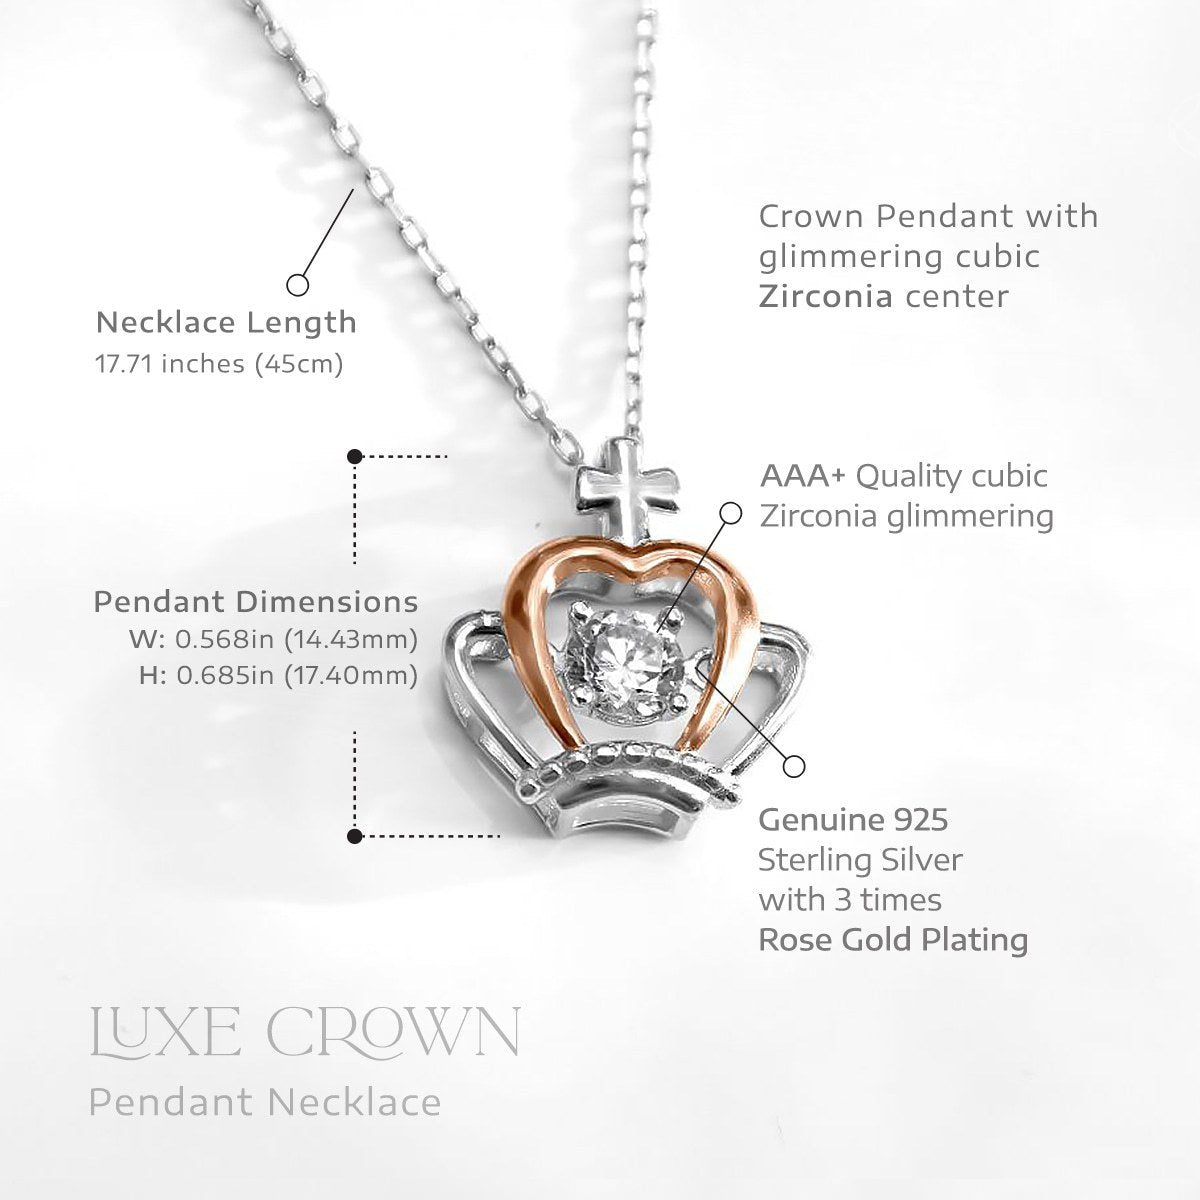 To My Badass Granddaughter - Luxe Crown Necklace Gift Set